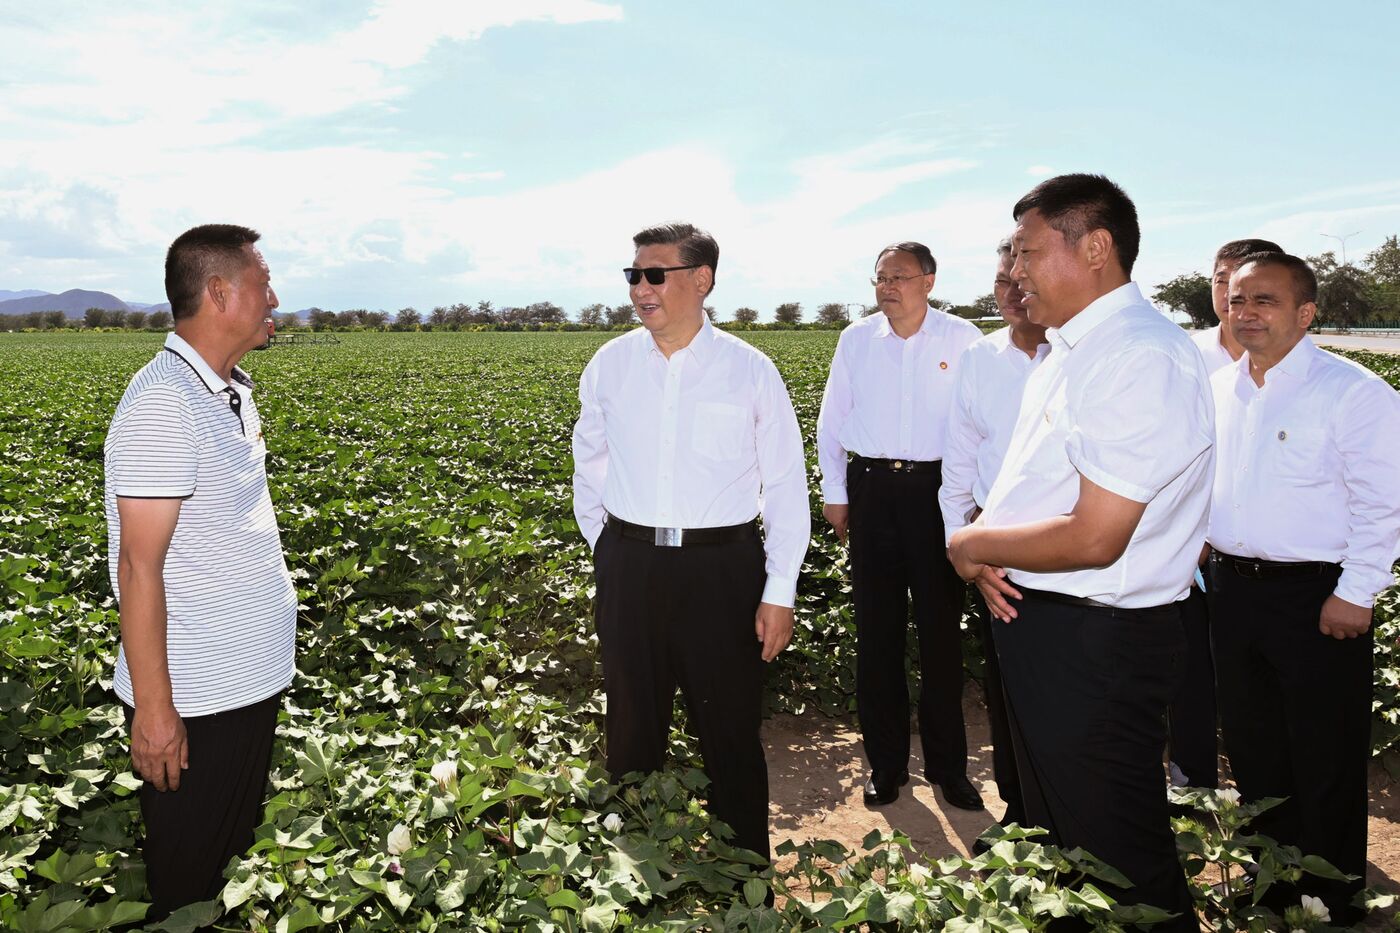 relates to Shein’s Cotton Tied to Chinese Region Accused of Forced Labor